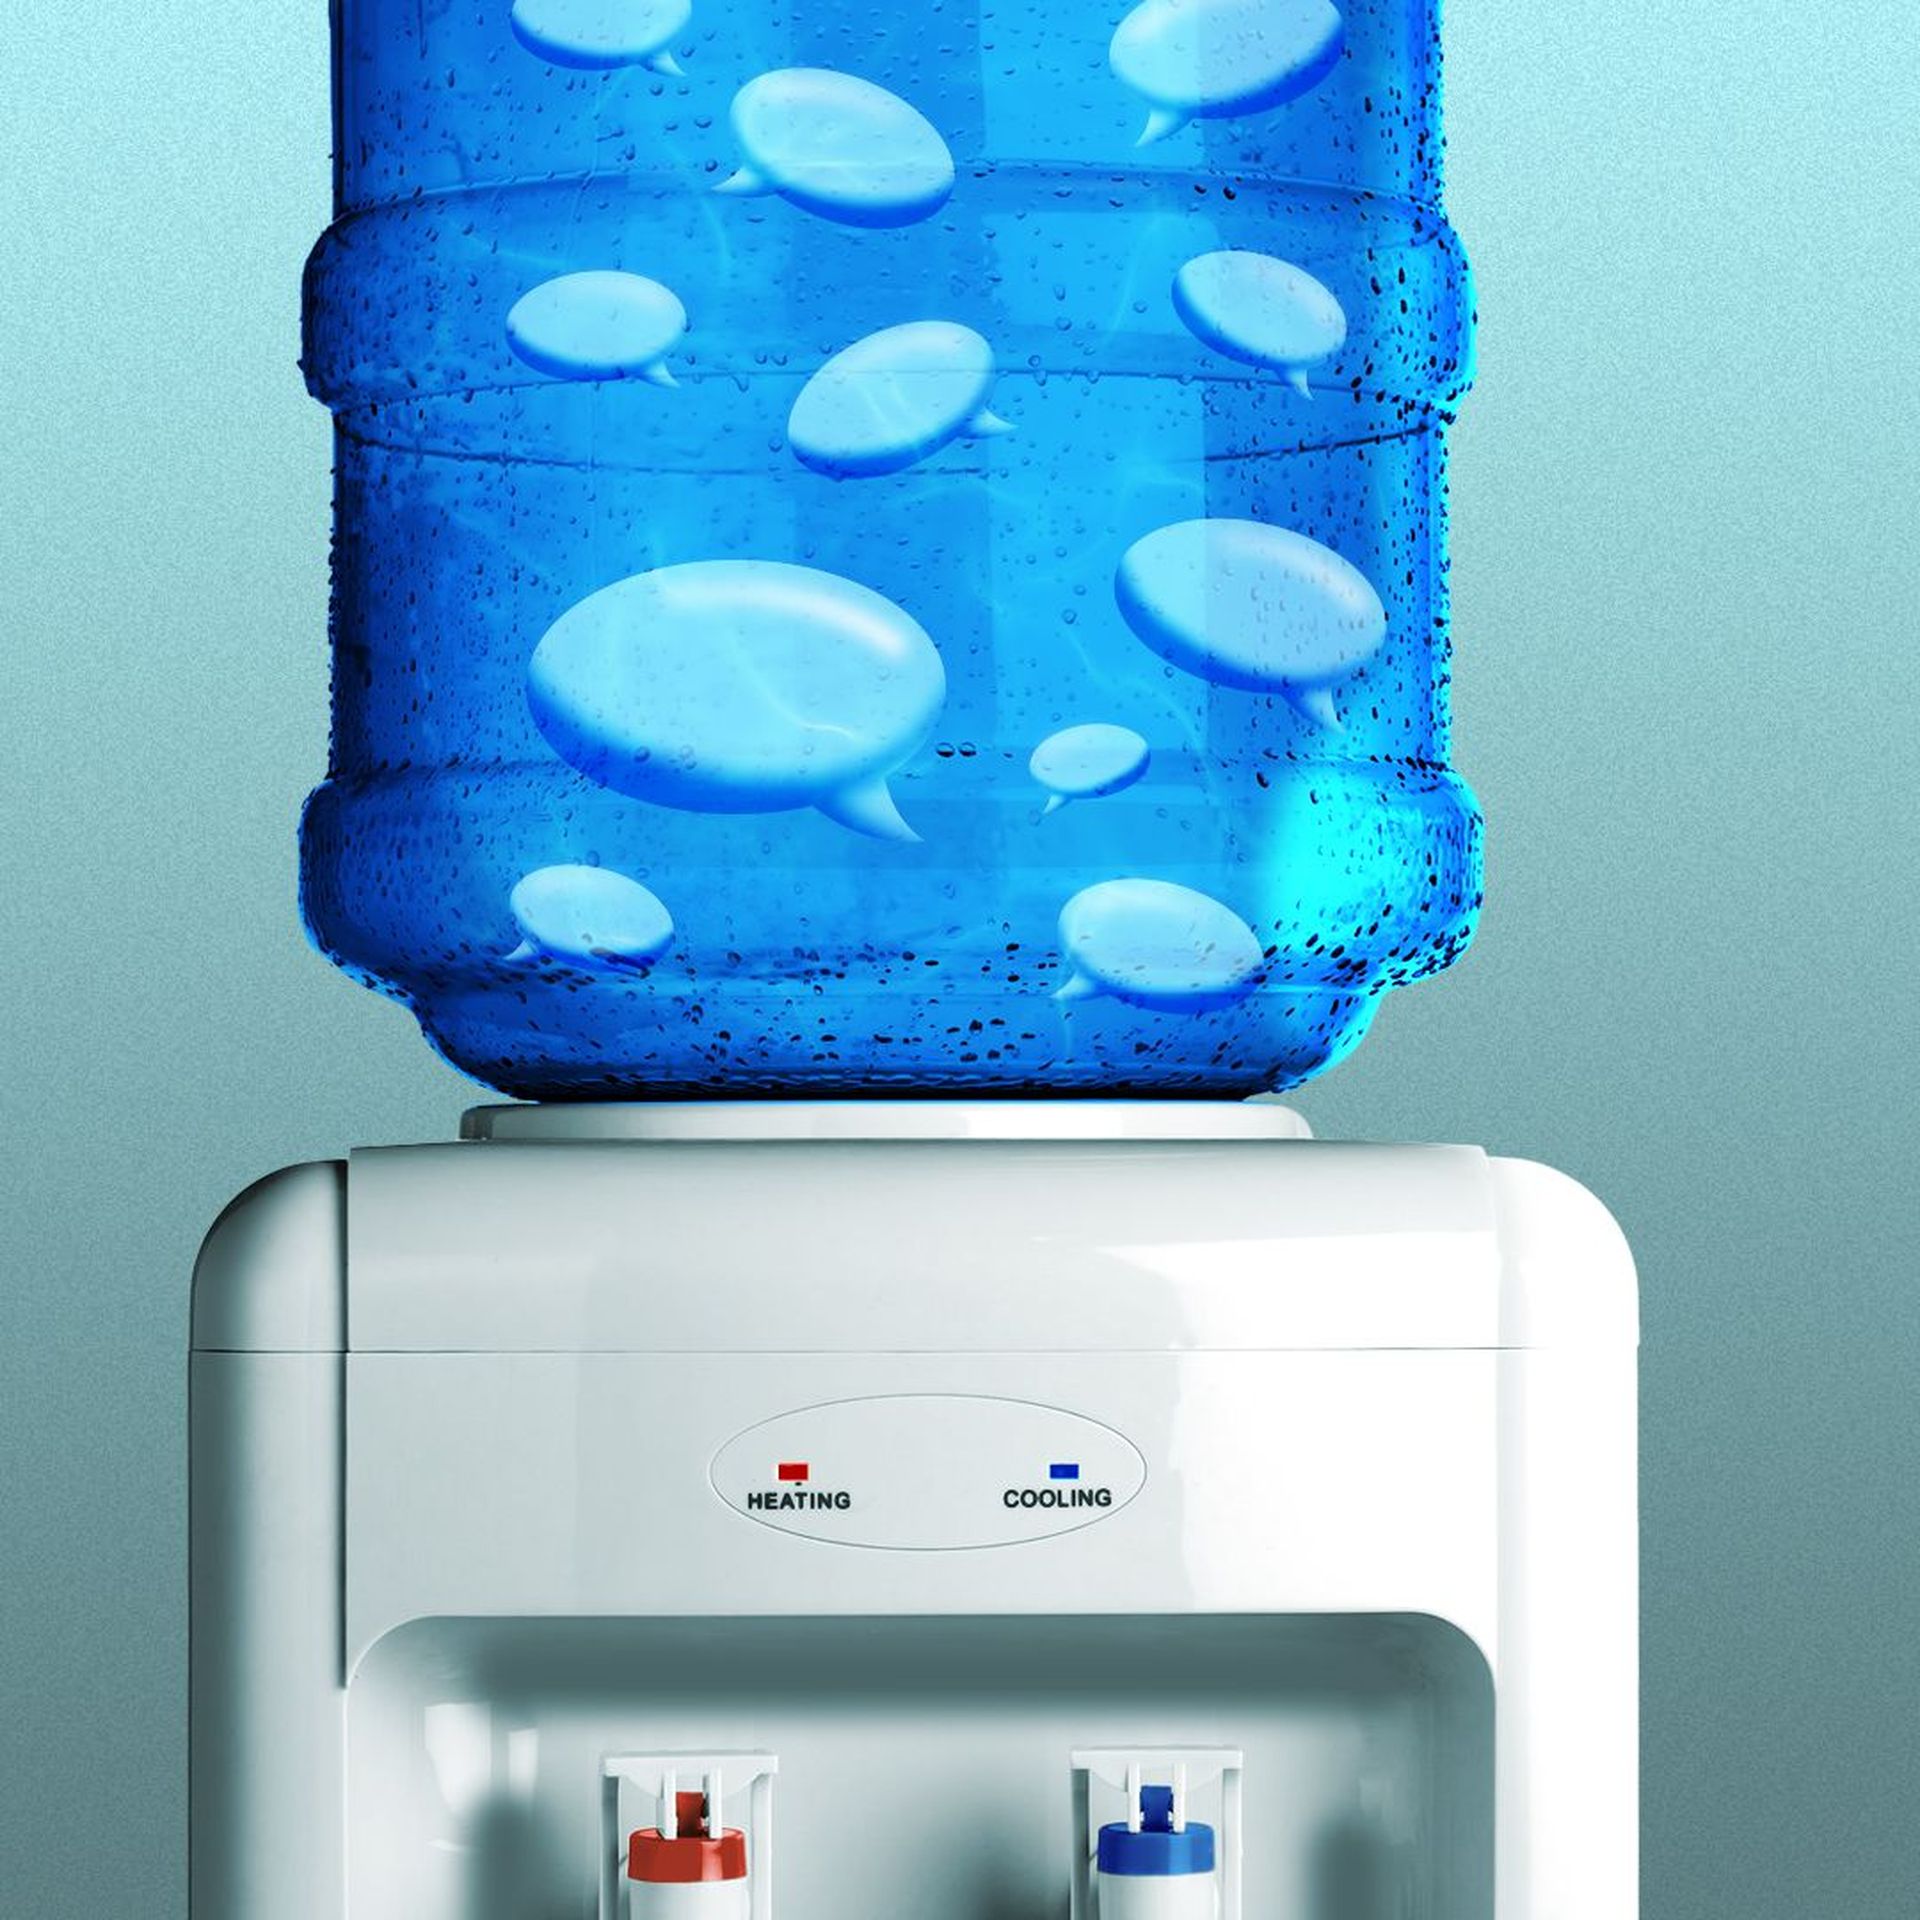 Illustration of a water cooler filled with chat bubbles